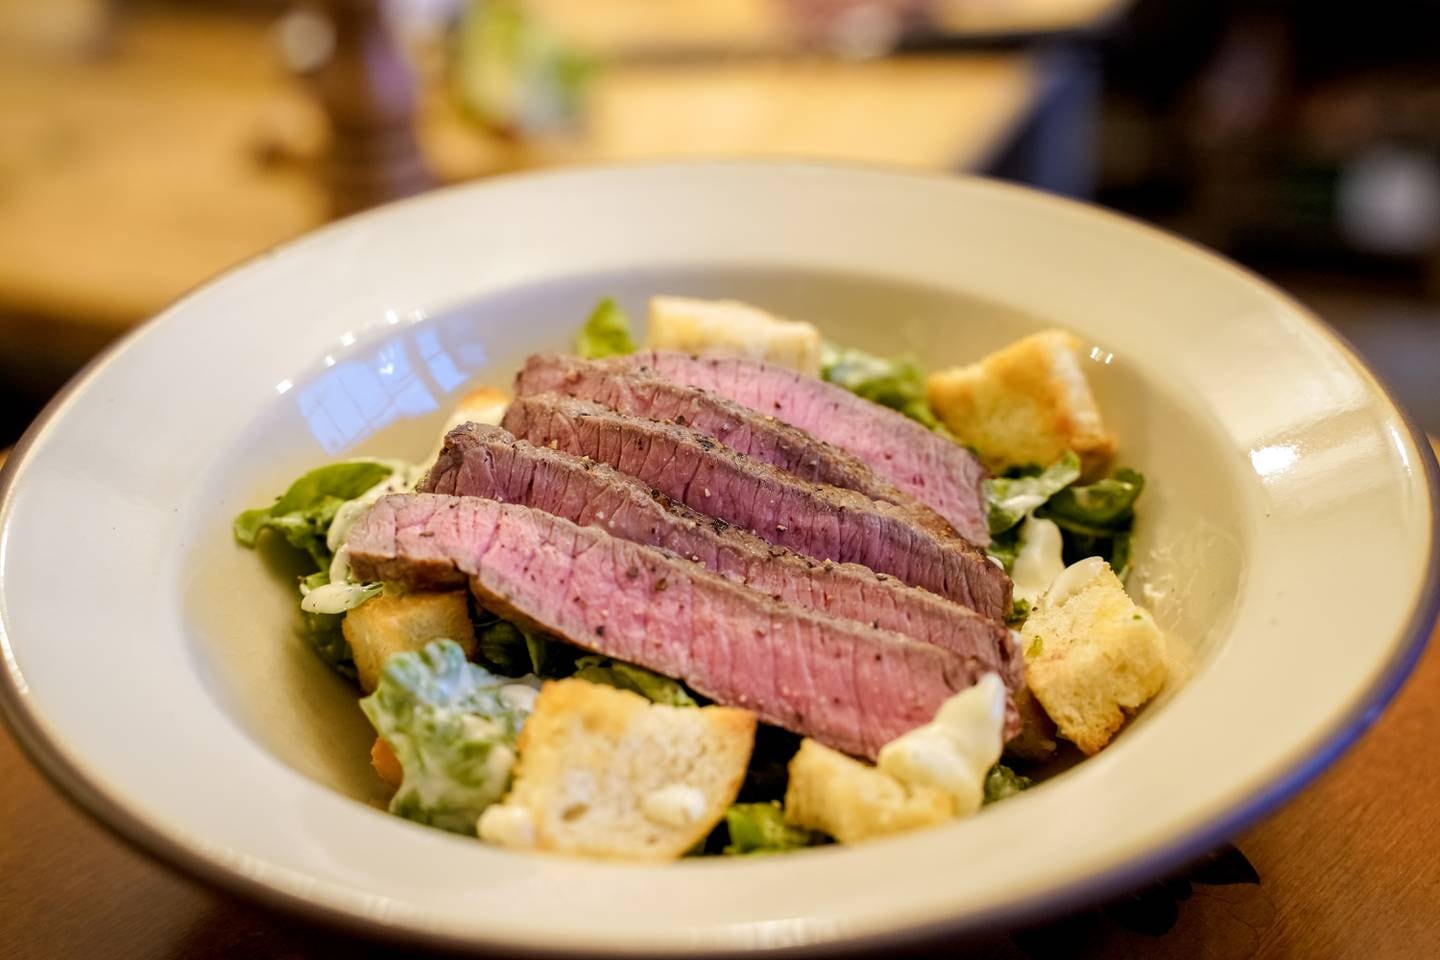 Steak and chips salad with blue cheese dressing. Photo: Scott Price